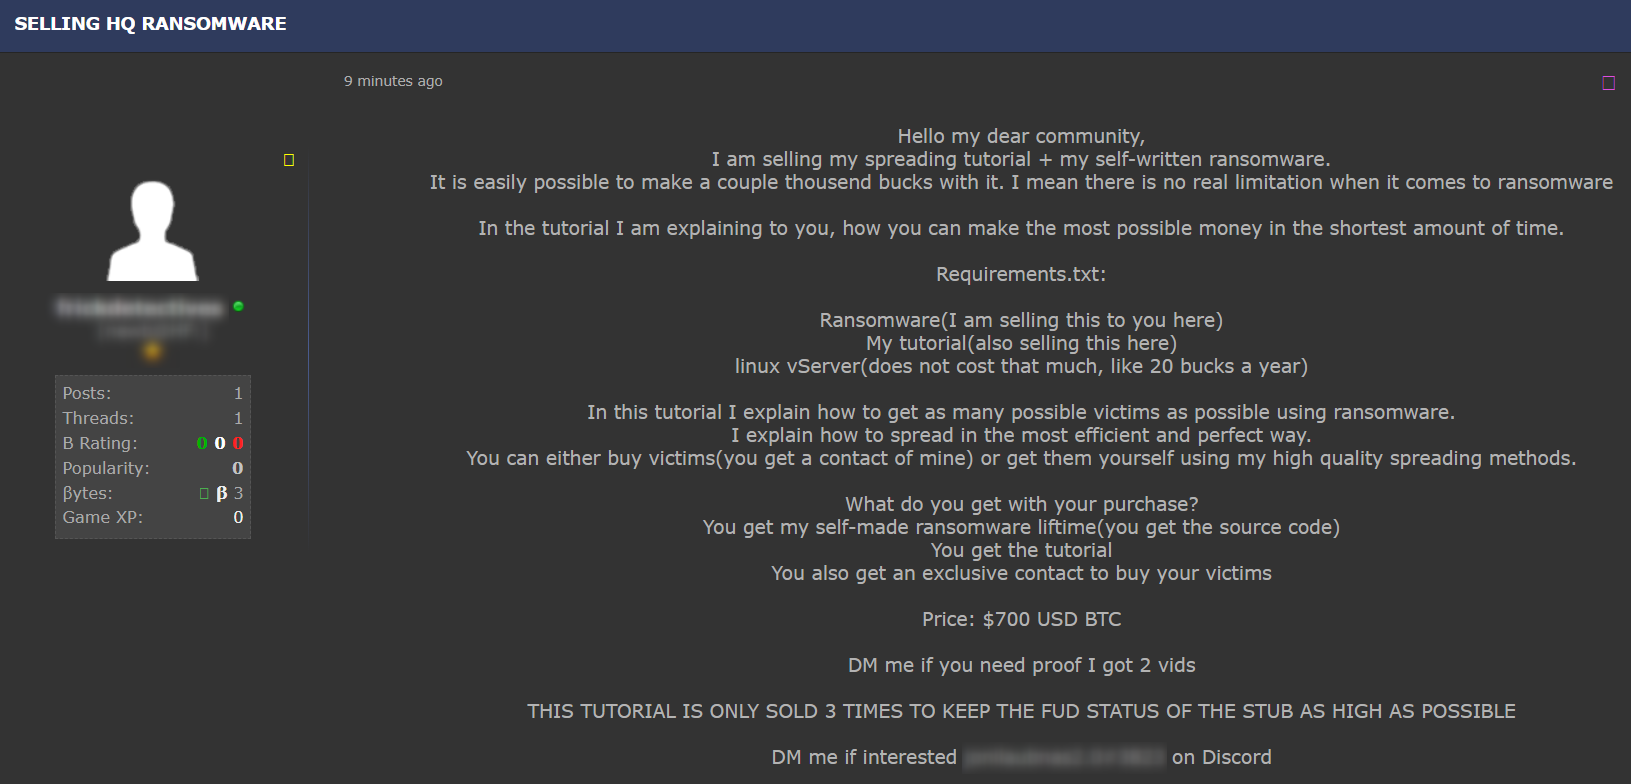 A cybercriminal offering ransomware for sale along with ransomware tutorial on Hackforums.